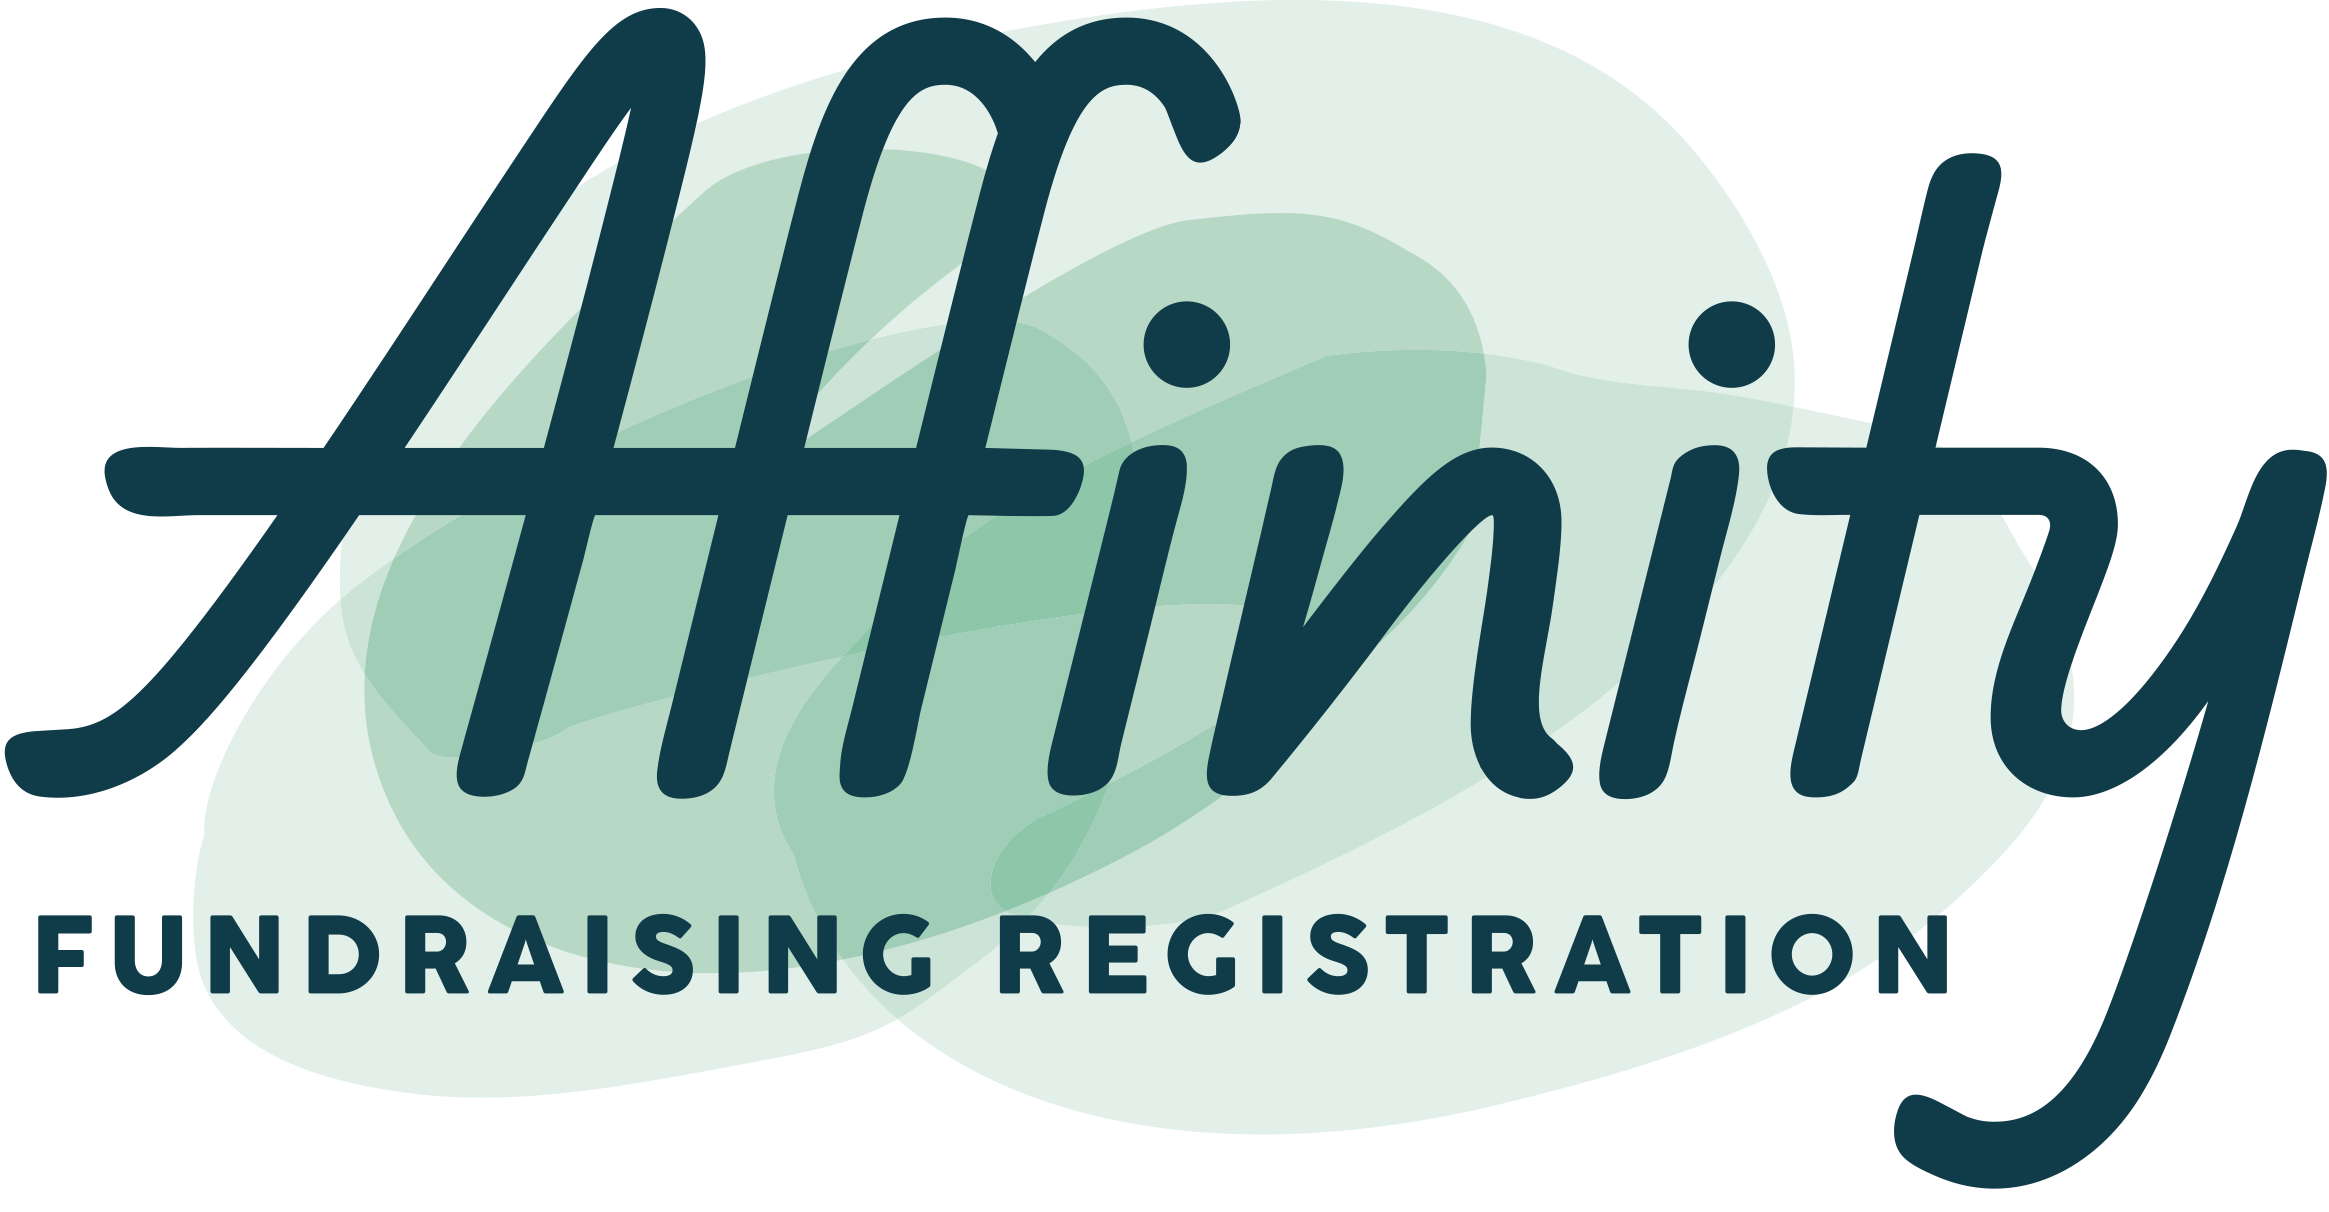 About Affinity Fundraising Registration Affinity Fundraising Registration